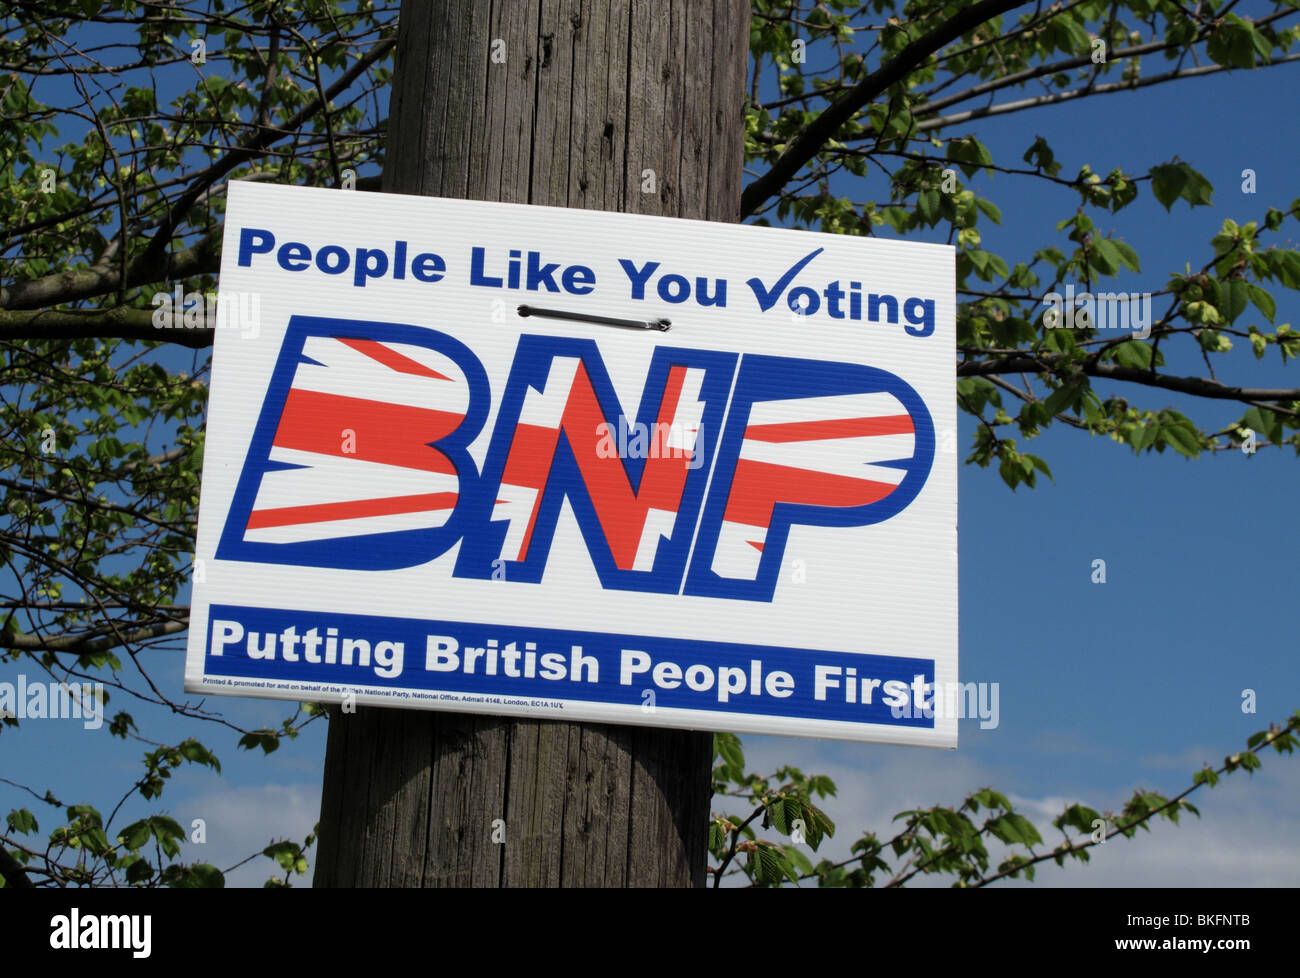 A roadside sign supporting the BNP (British National Party) in the 2010 U.K. General Election. Stock Photo